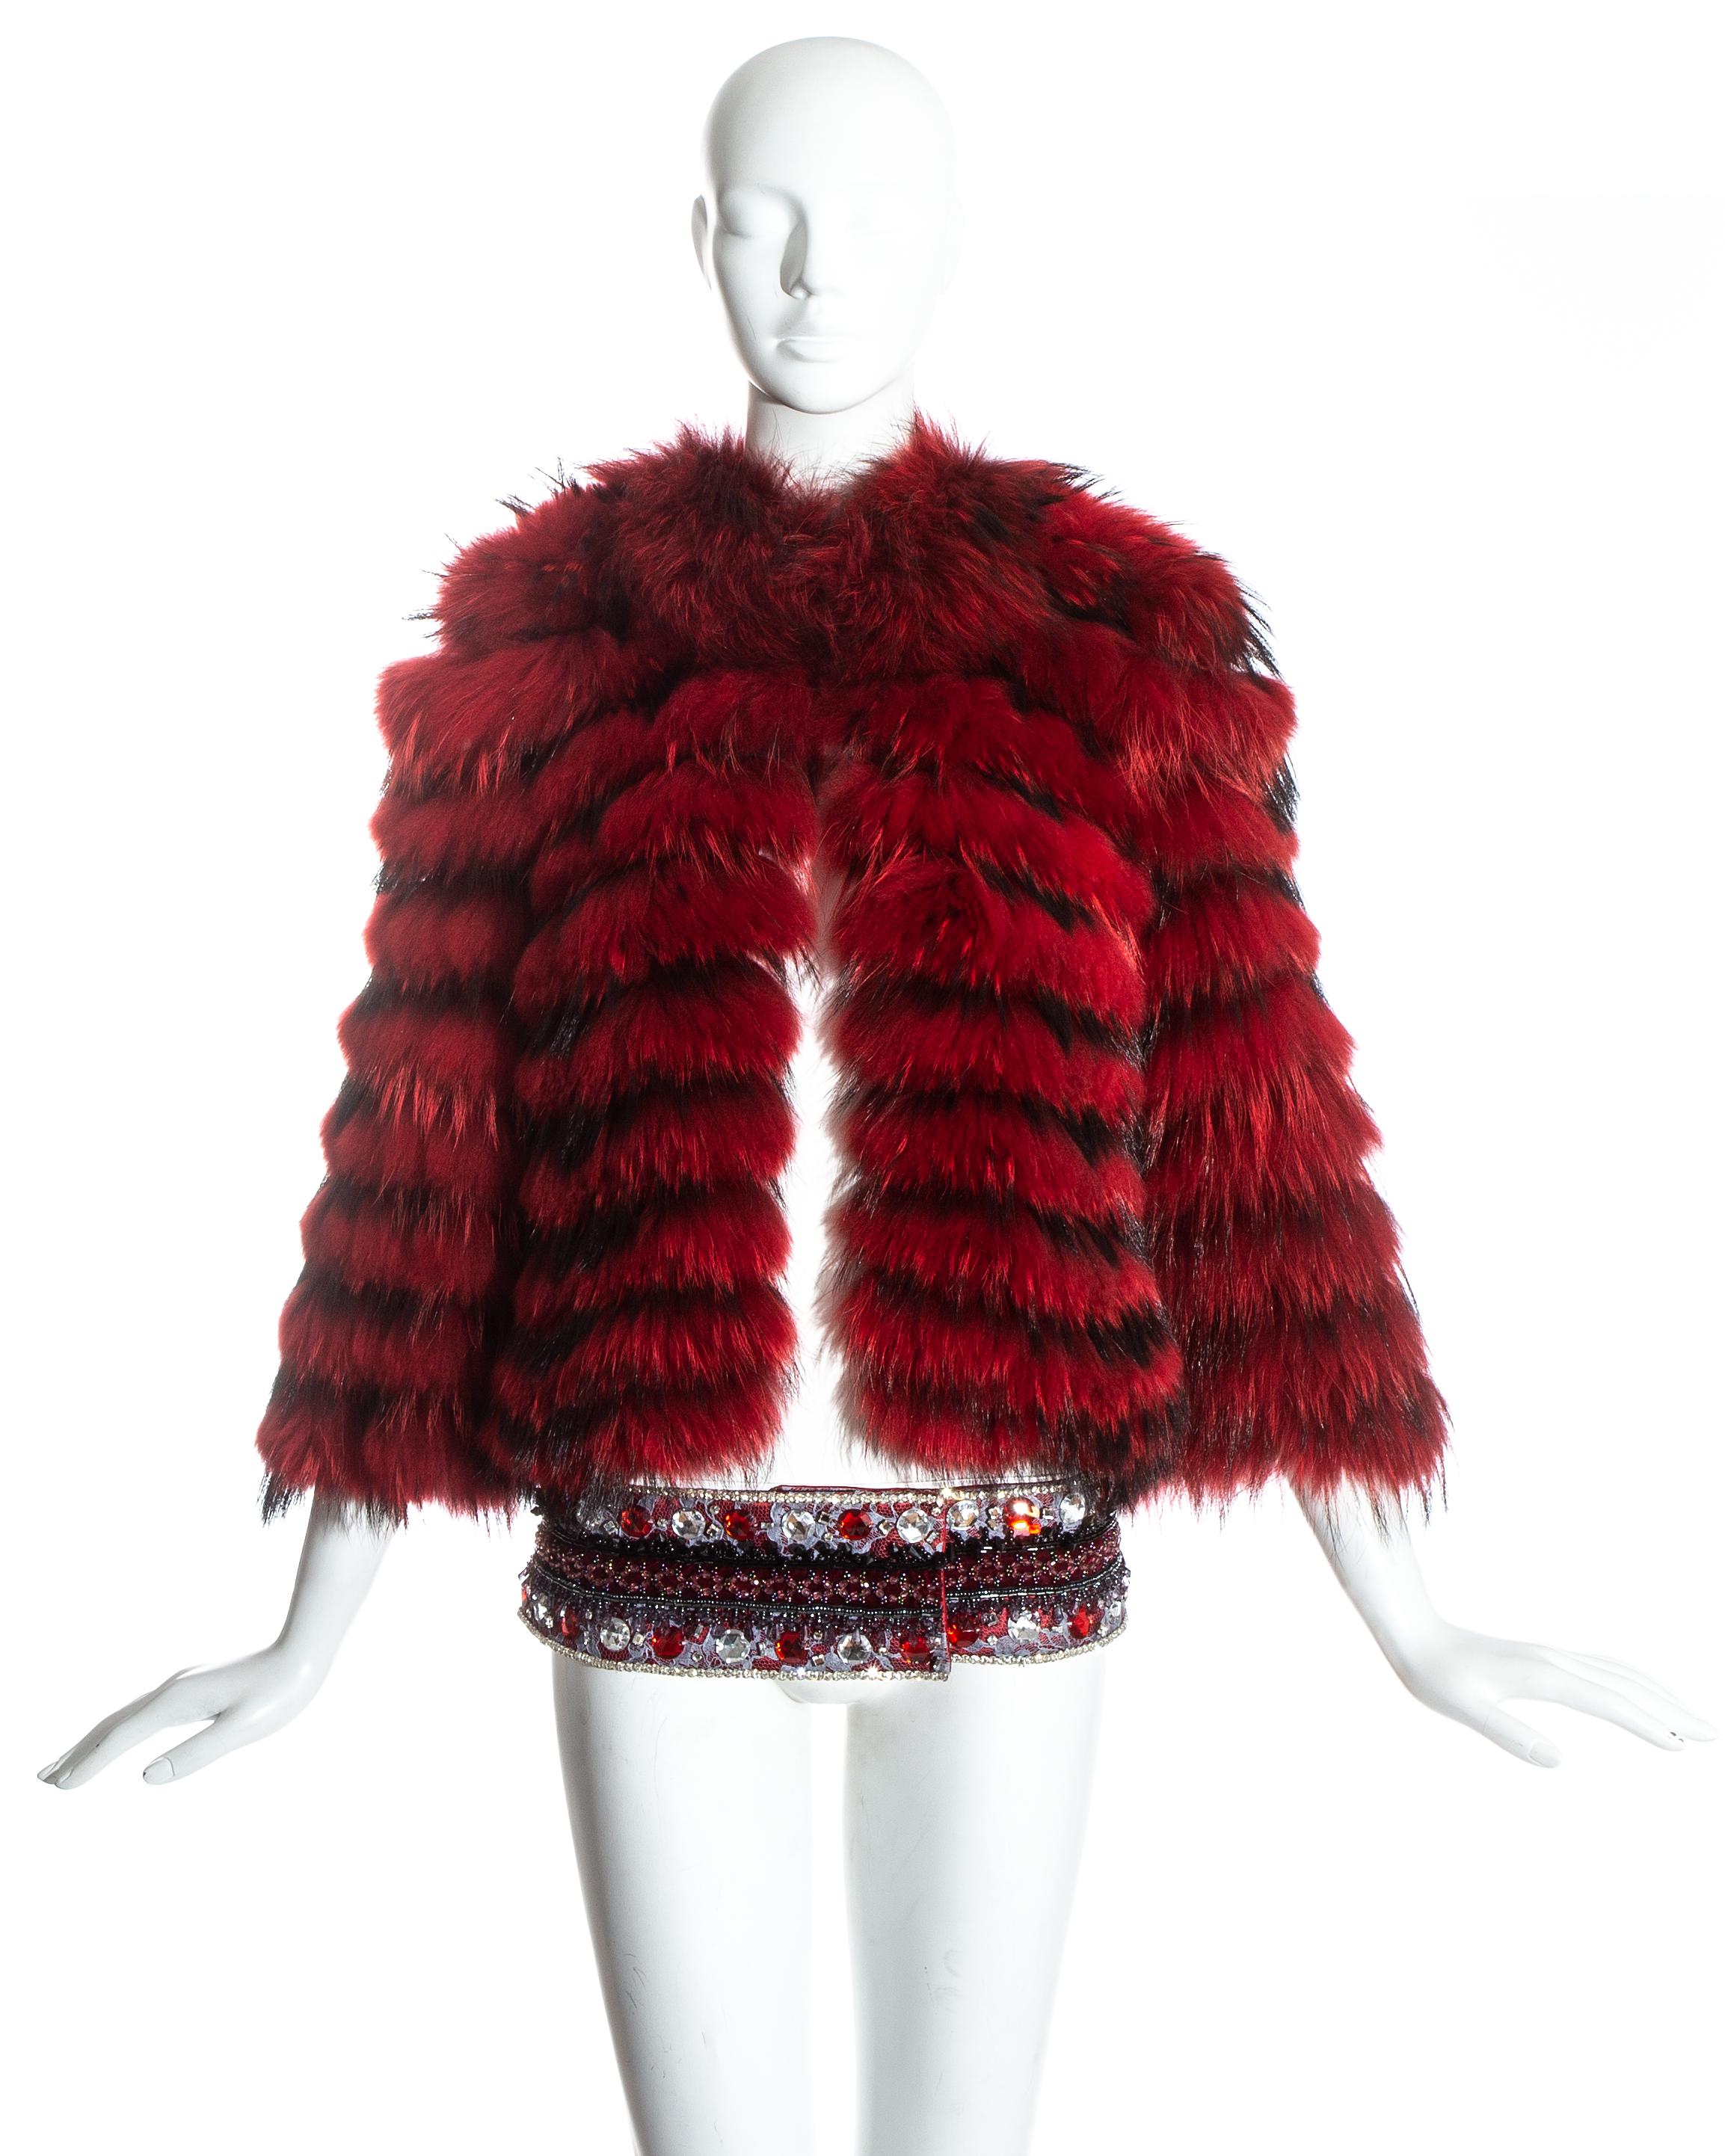 Dolce & Gabbana red and black fox fur cropped jacket. Sold with embellished rhinestone belt.

Fall-Winter 1999